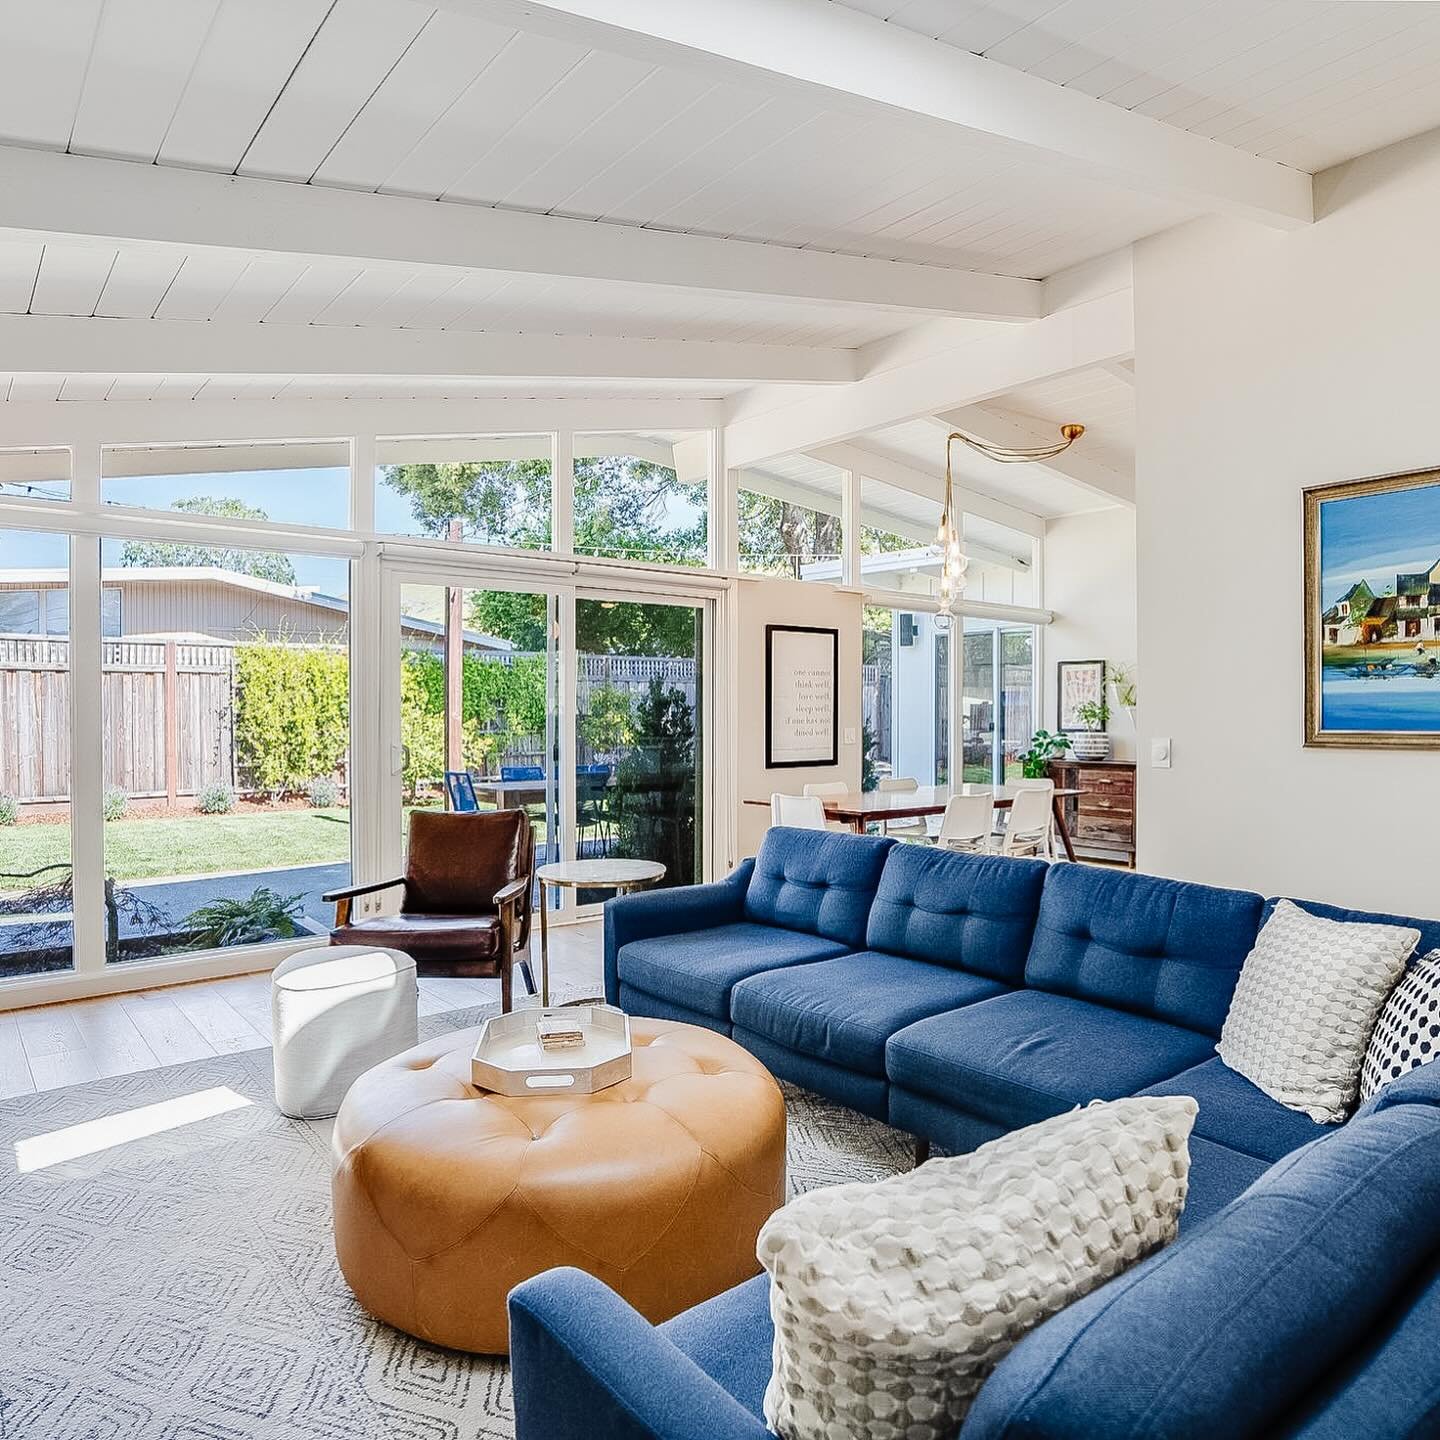 Step into 461 Hickory Lane and immerse yourself in mid-century modern charm with 4 beds, 2 baths, and a sunlit office, all nestled in sunny Terra Linda. 

Vaulted ceilings, warm wood accents, and expansive windows invite the outdoors in, offering the